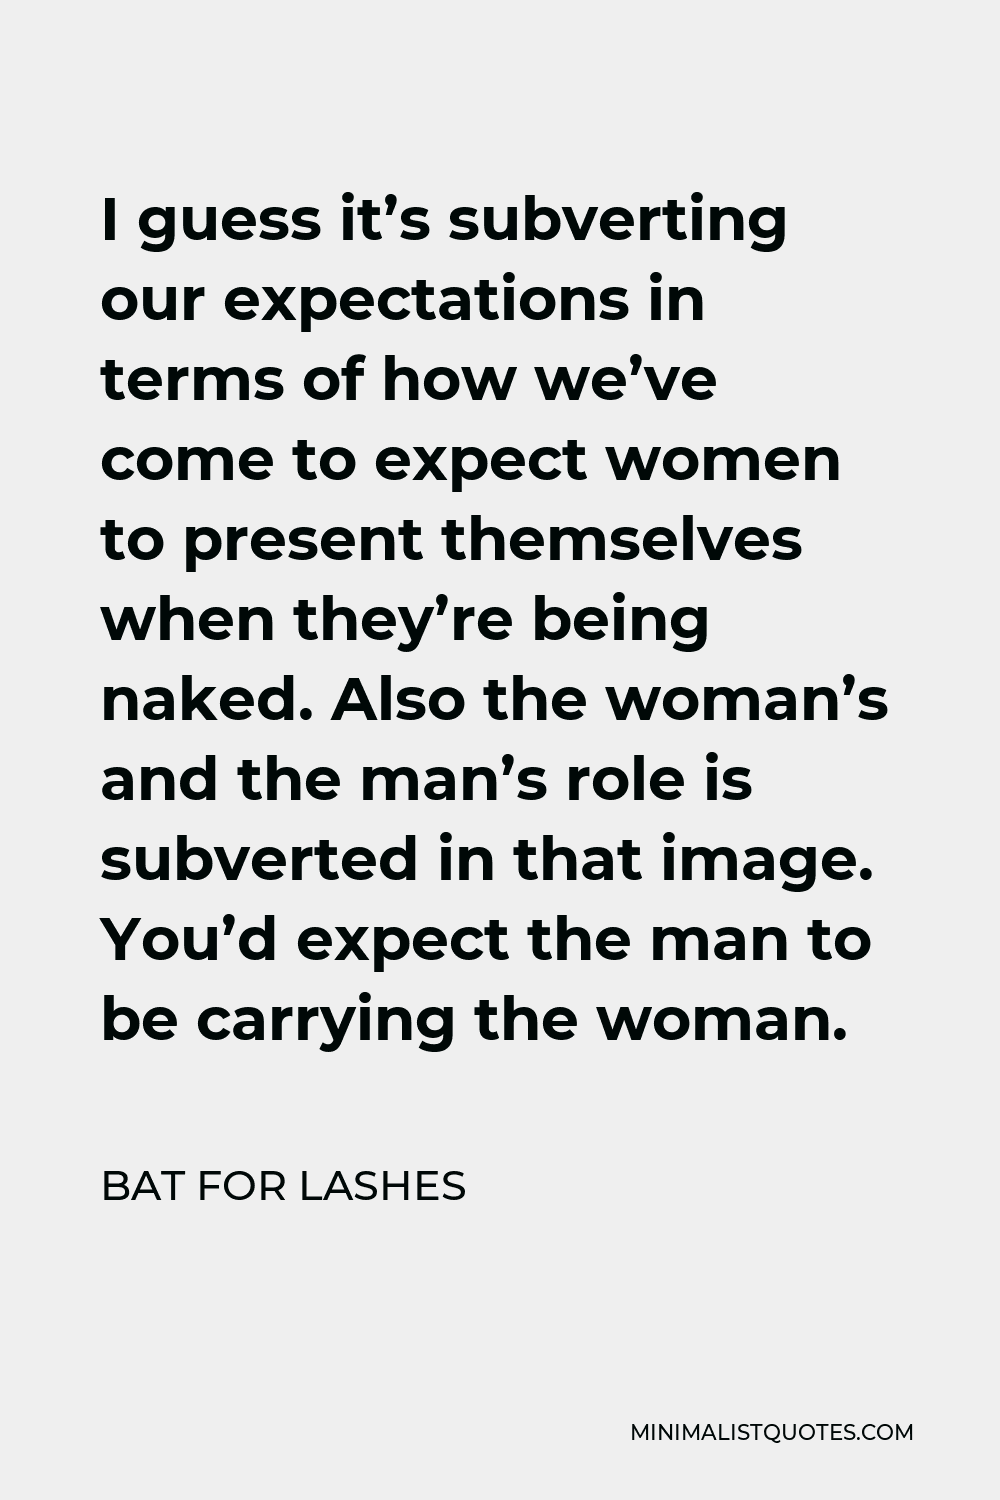 Bat for Lashes Quote - I guess it’s subverting our expectations in terms of how we’ve come to expect women to present themselves when they’re being naked. Also the woman’s and the man’s role is subverted in that image. You’d expect the man to be carrying the woman.